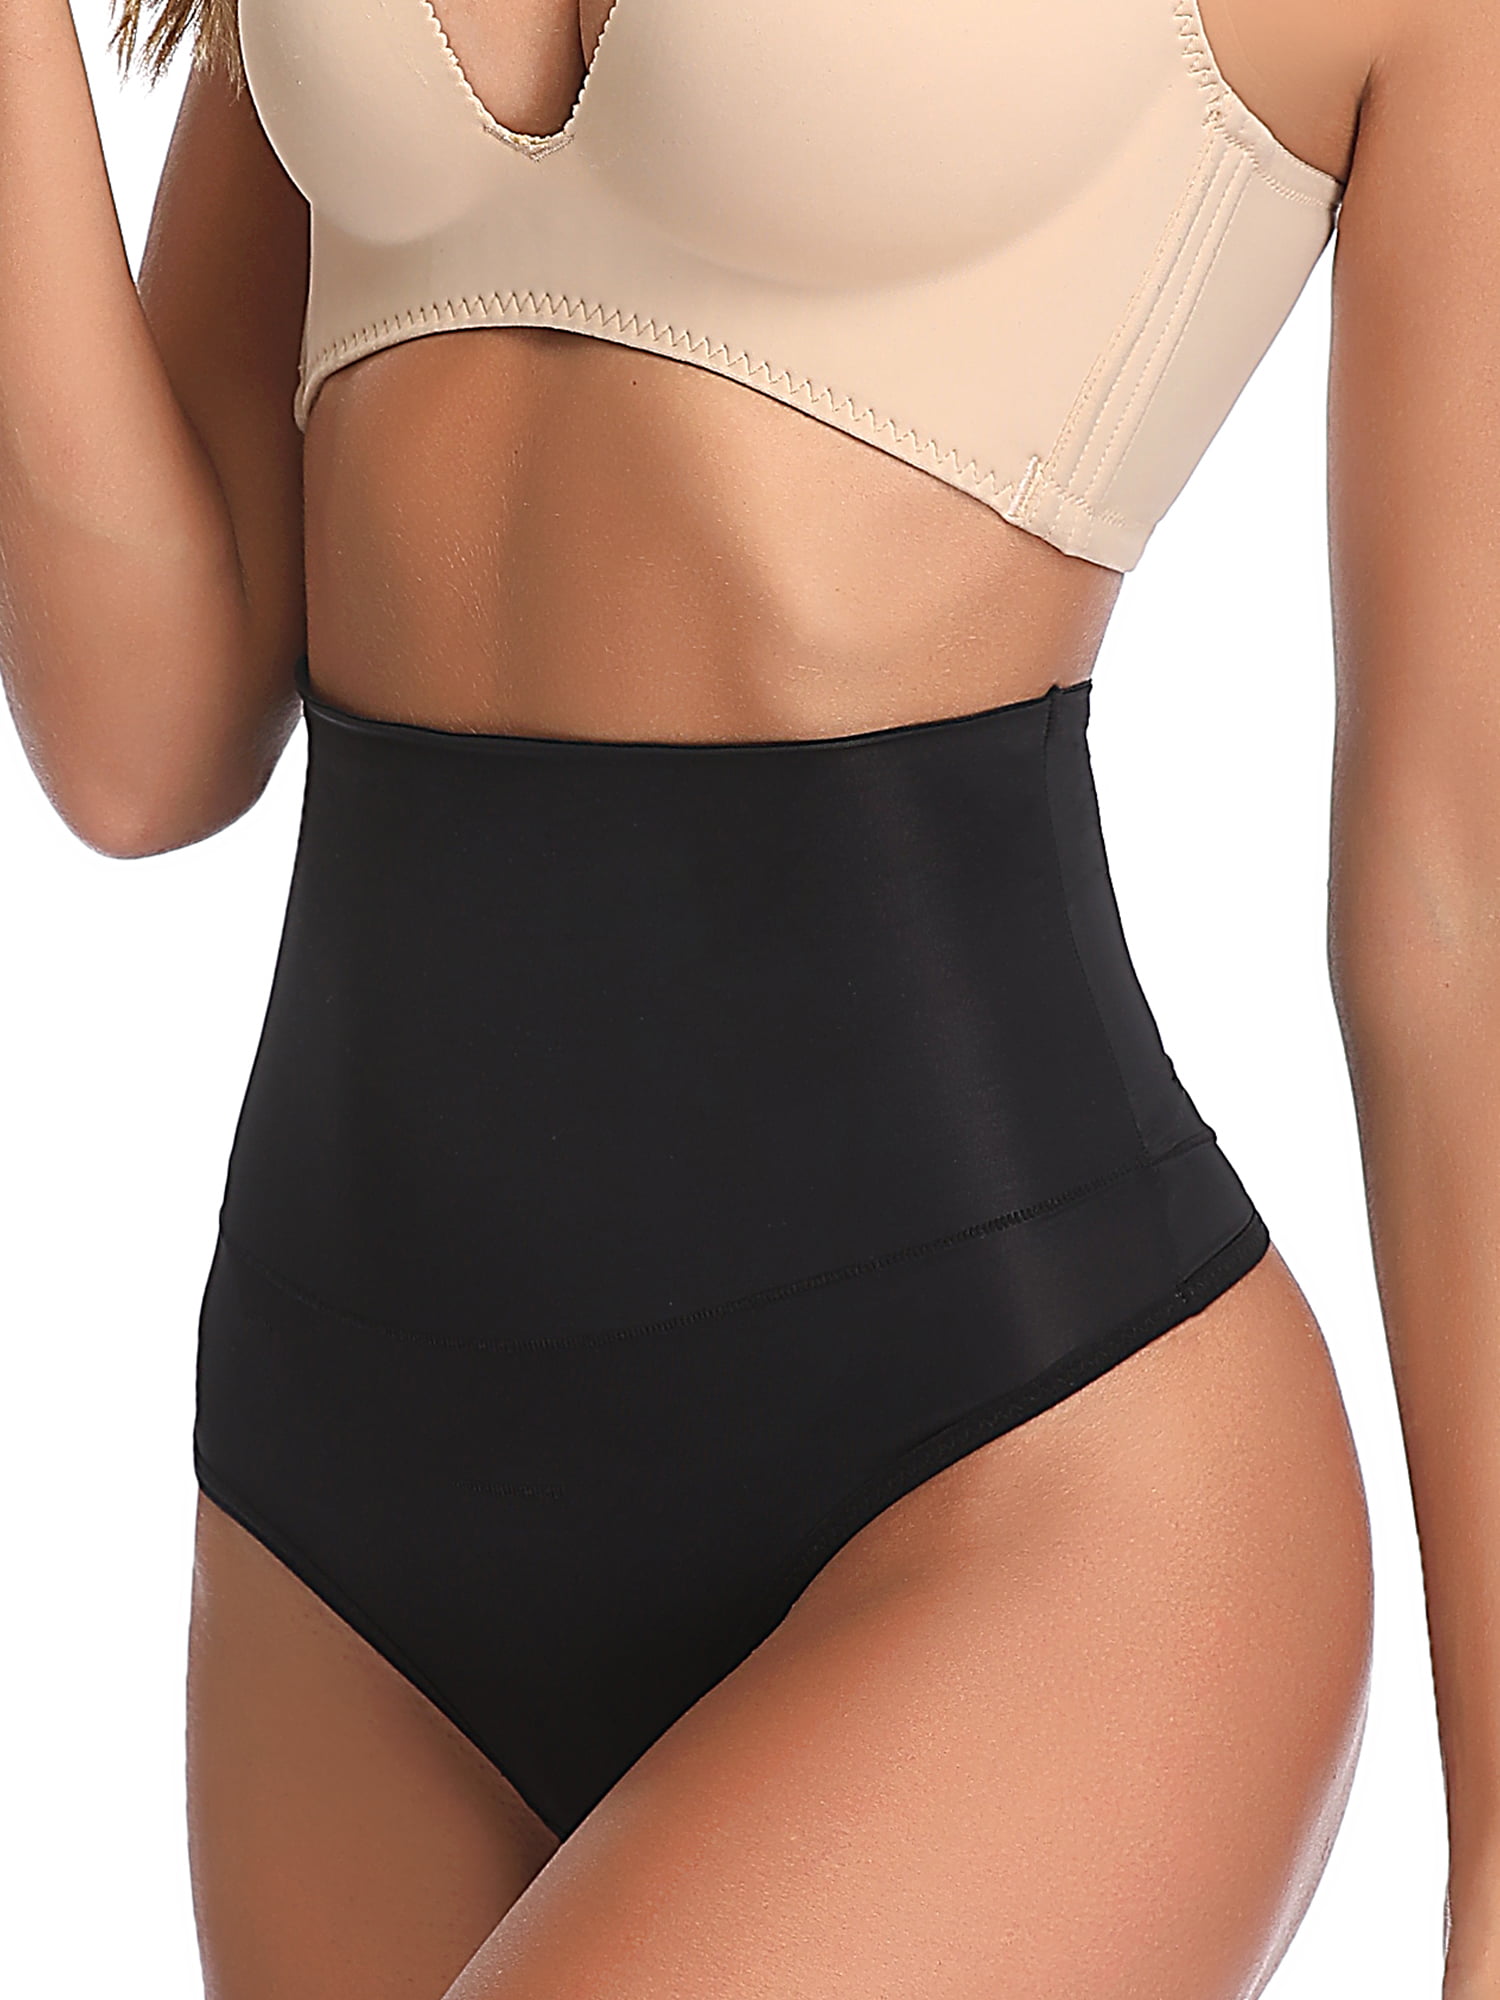 BodyShape Full Body Shape, Thong Bra Backless, Invisible Tummy Control, Slimming  Shapewear For Women From Loveclothingfz3, $13.9